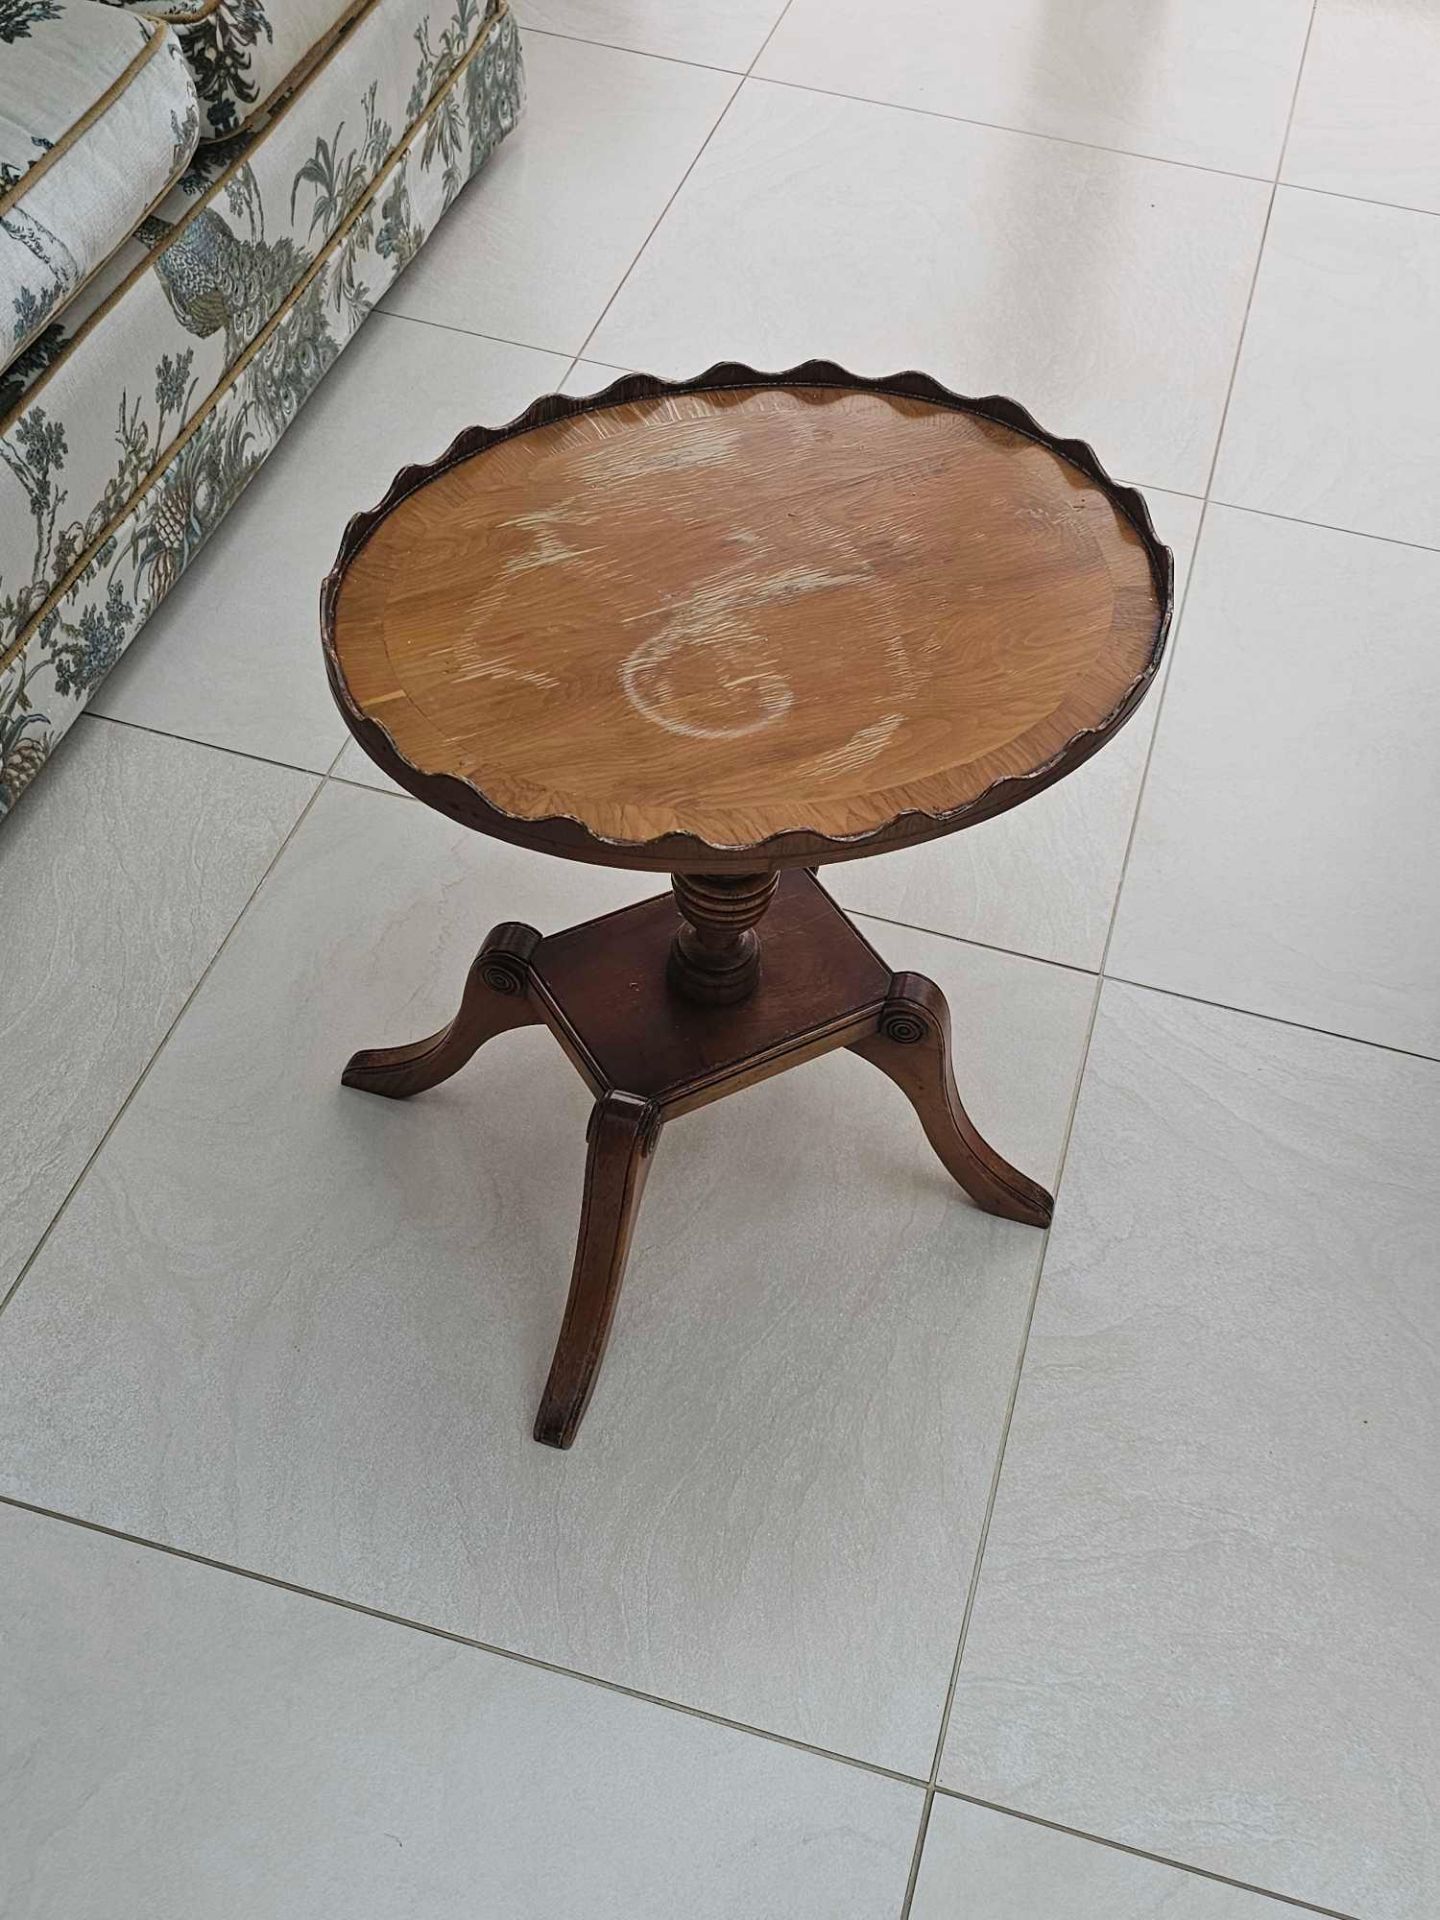 Bevan Funnell Reprodux Oval Mahogany Pedestal Wine Table In The Regency Style Having Shaped Wooden - Image 4 of 4